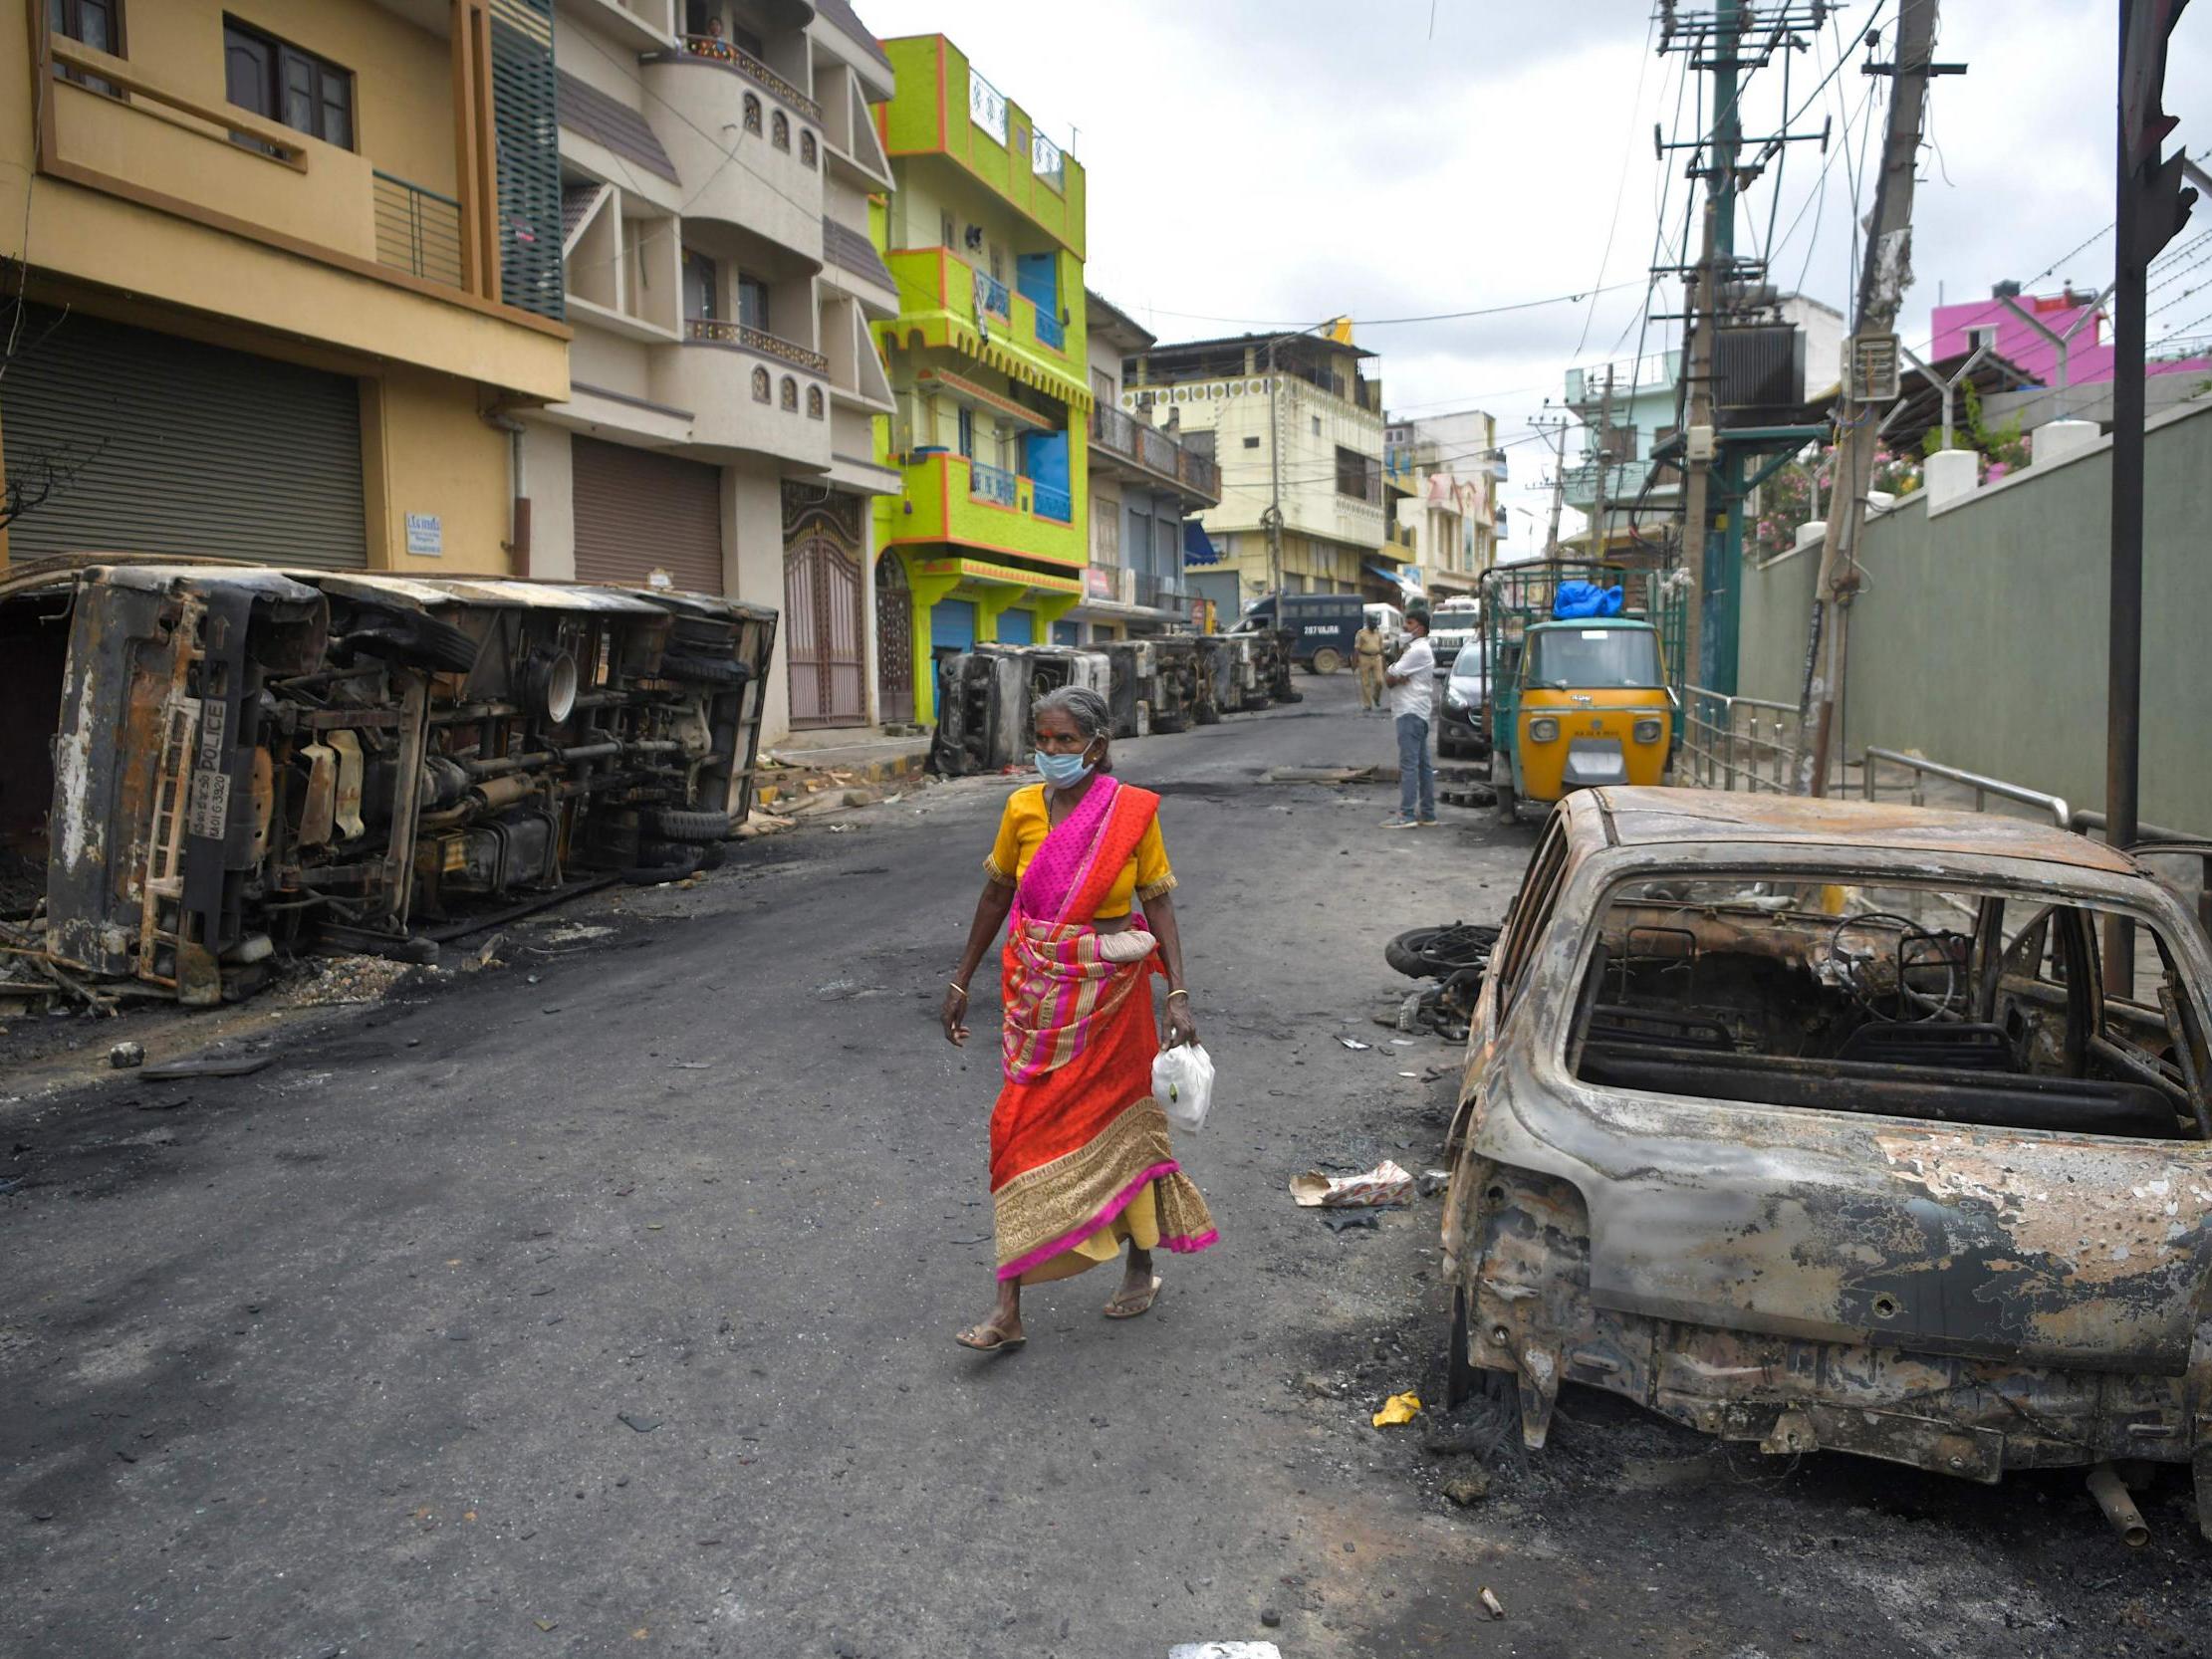 A resident walks past the burned-out remains of a car following protests in the city of Bengaluru, India, over a Facebook post about the Prophet Mohammed.